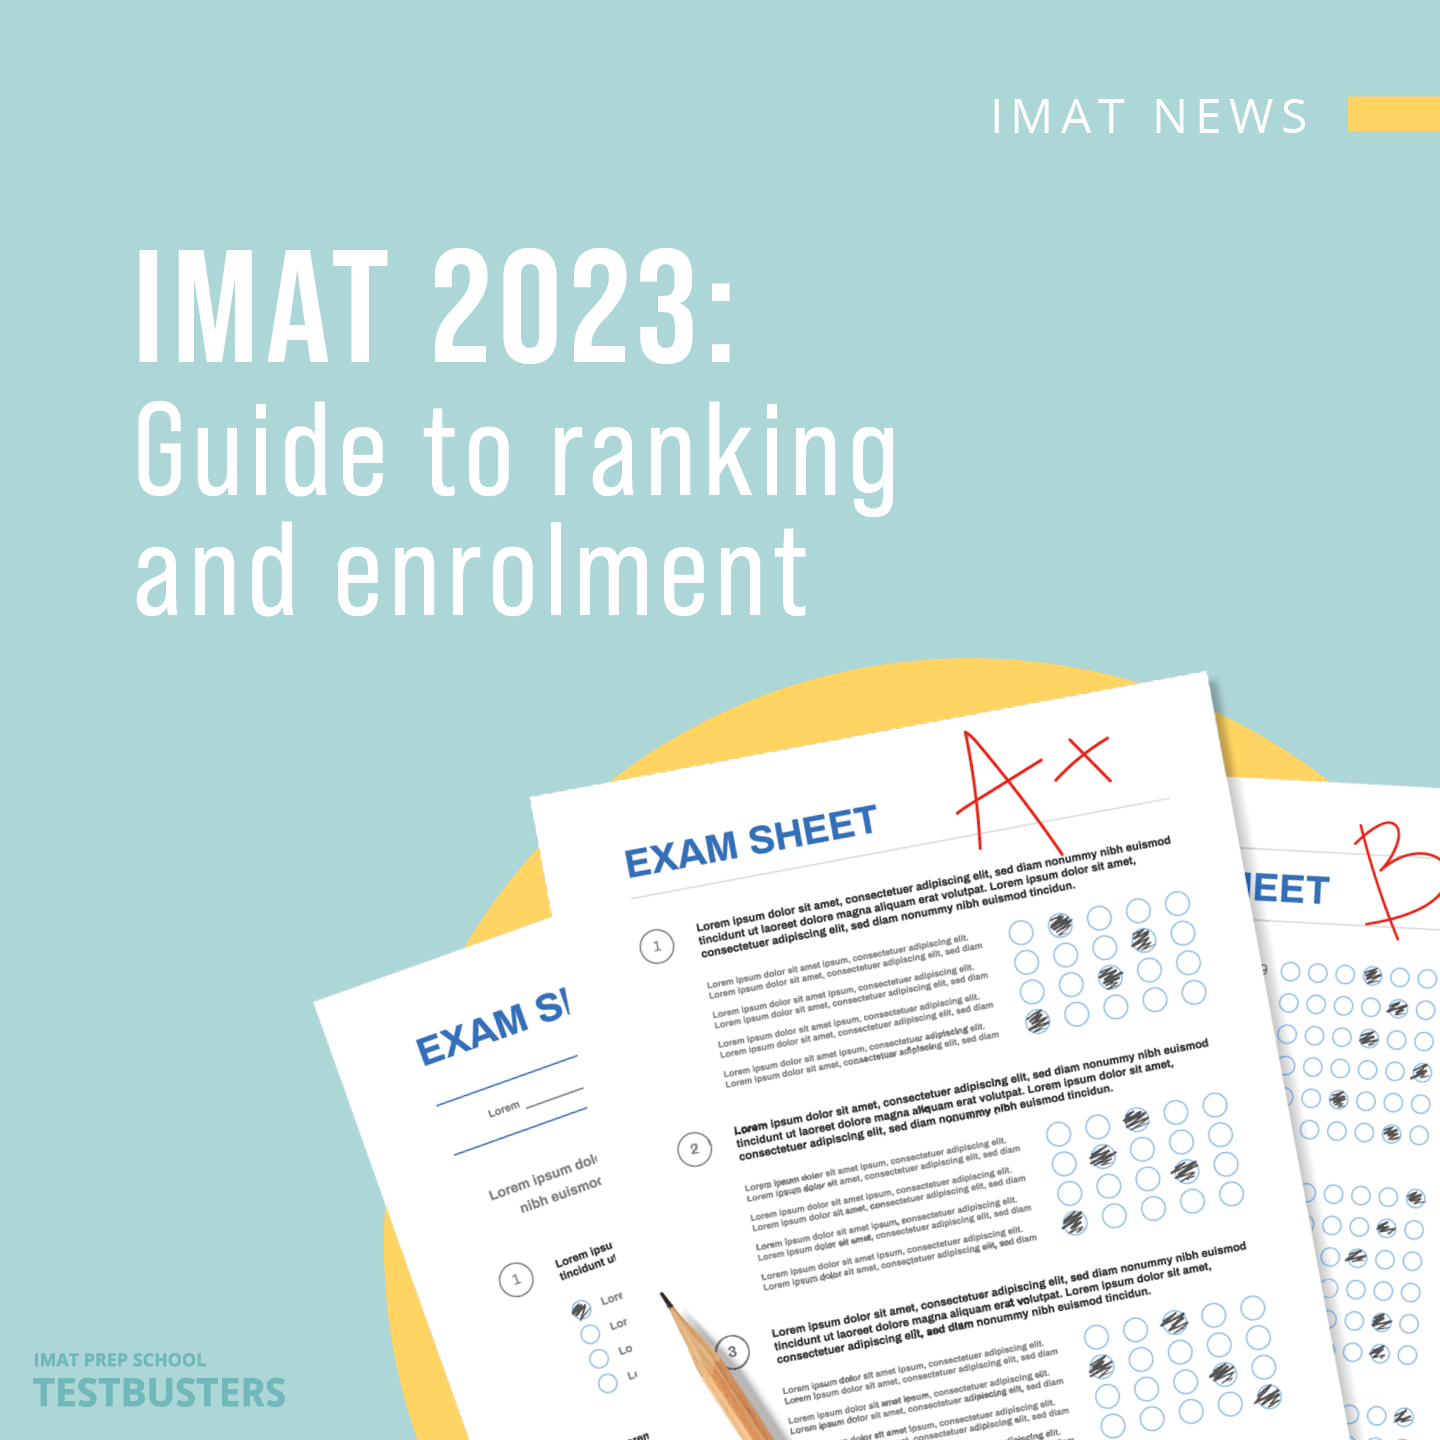 IMAT 2023: guide to ranking and enrollment